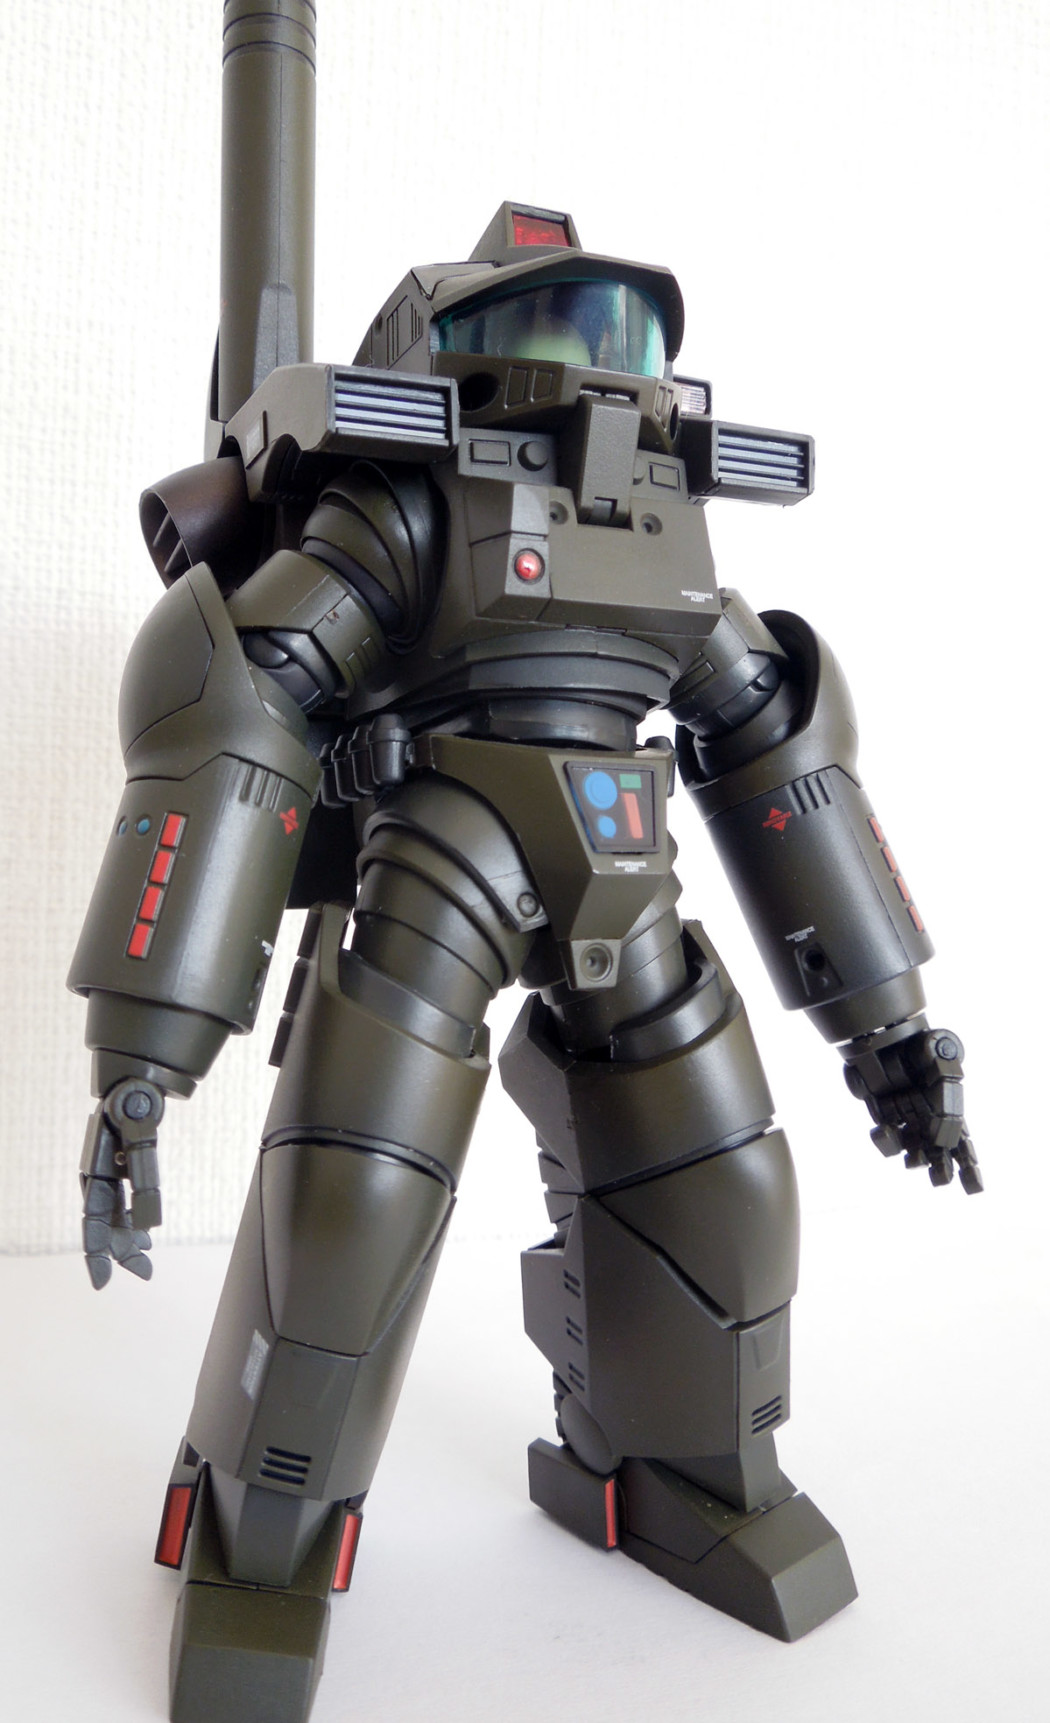 1/16 Powered Suit by Sentinel (Part 2: Review)